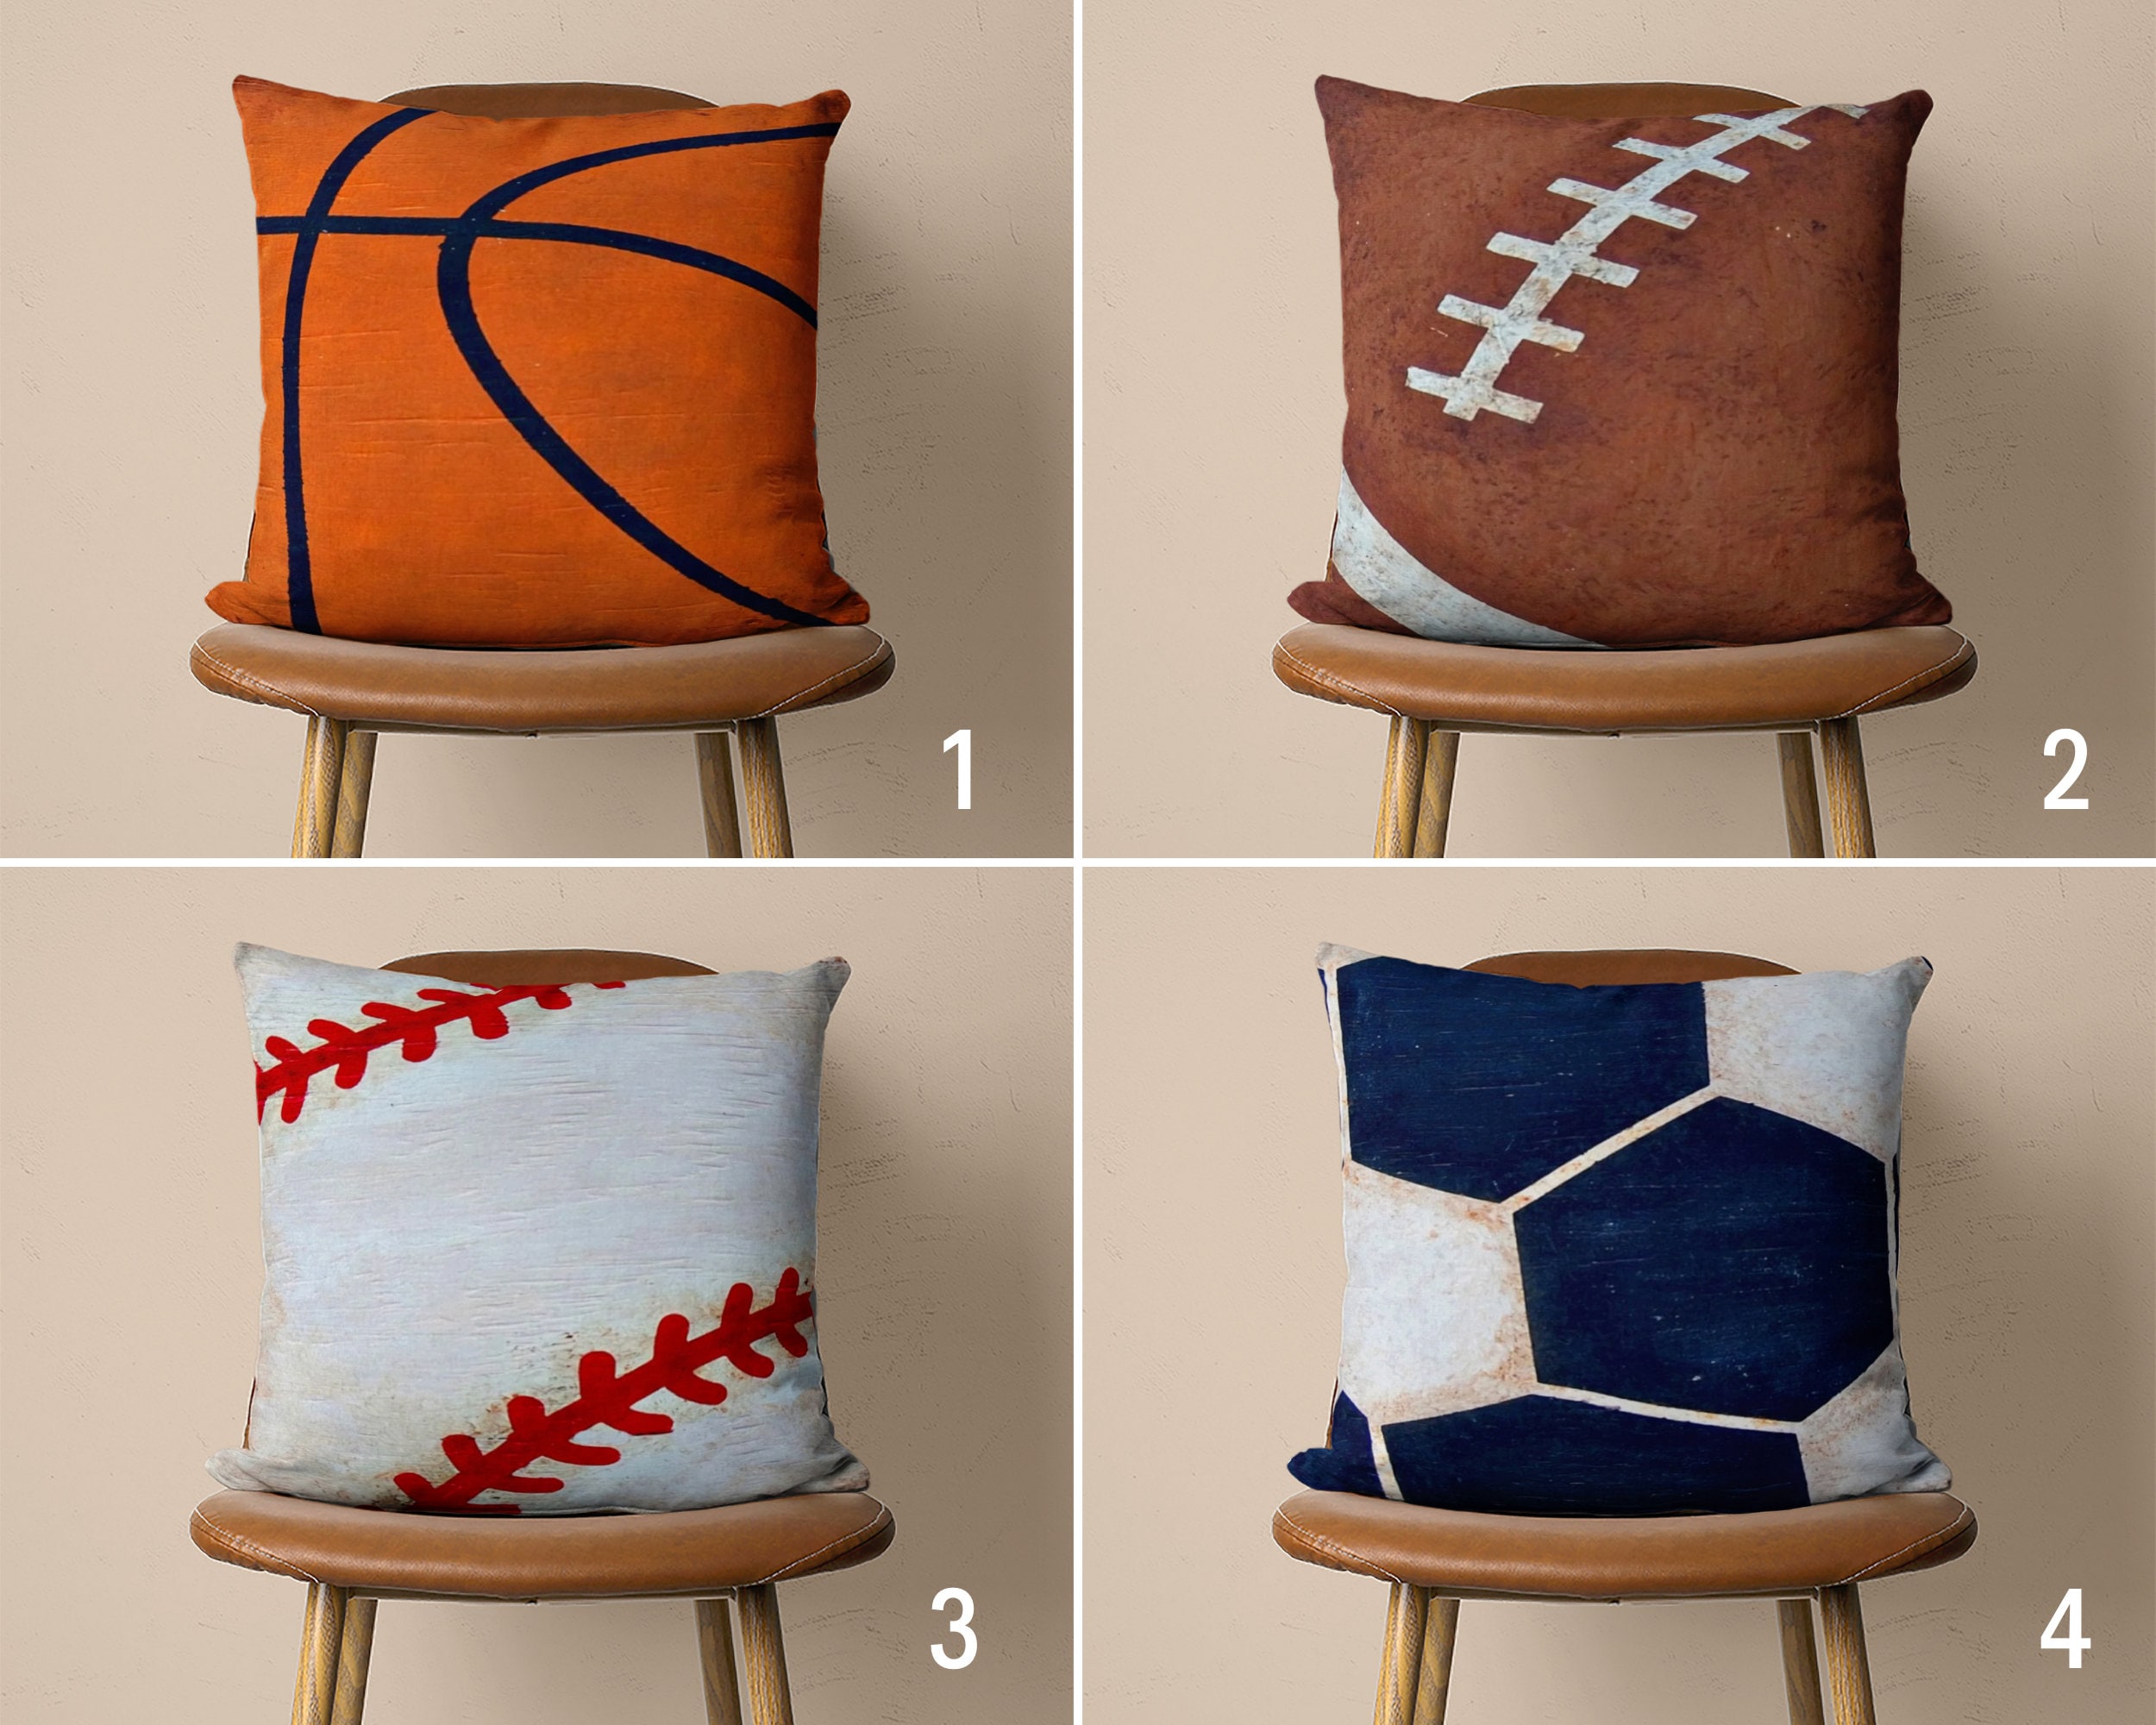  NEWVIY Basketball Ball in Outer Space Pillow Case Home  Decorative Square Throw Pillow Covers Cushion Case for Livingroom Sofa  Bedroom Car 20X20 : Home & Kitchen